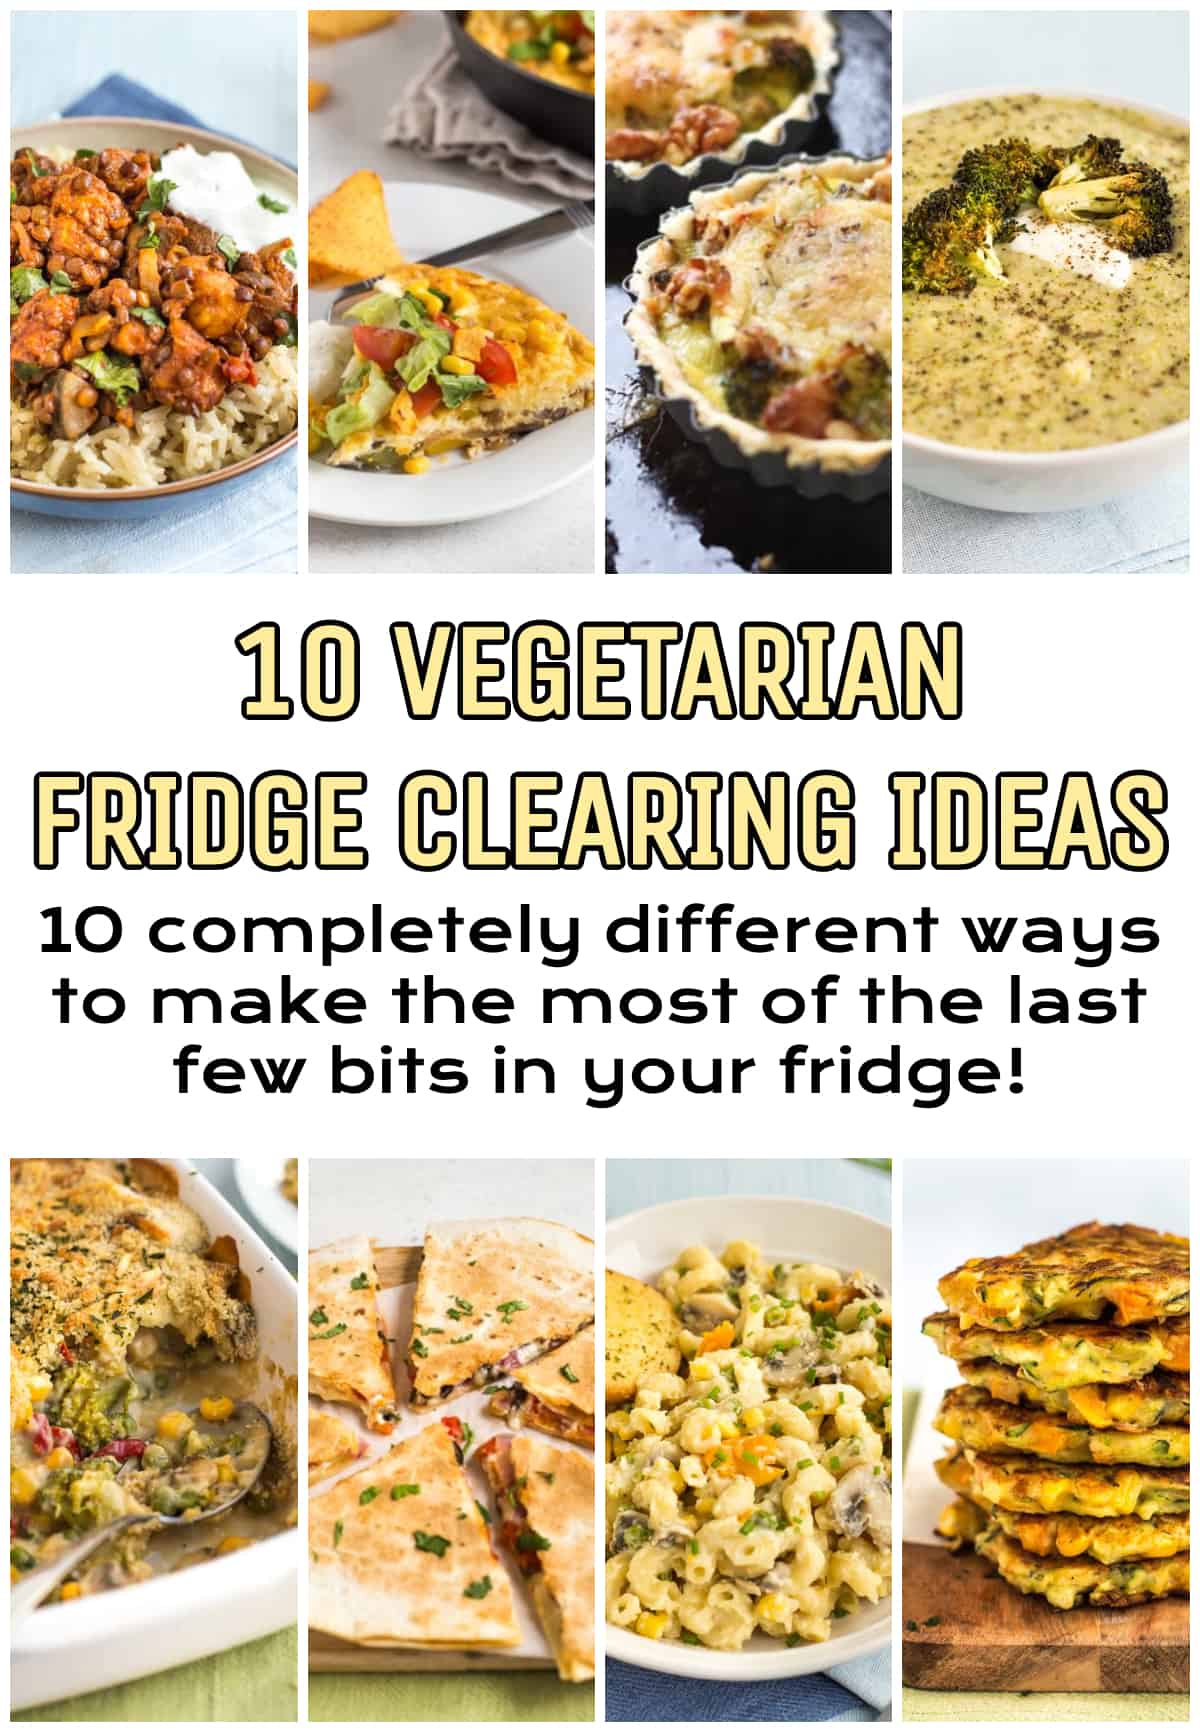 Collage showing lots of different vegetarian fridge clearing recipes.